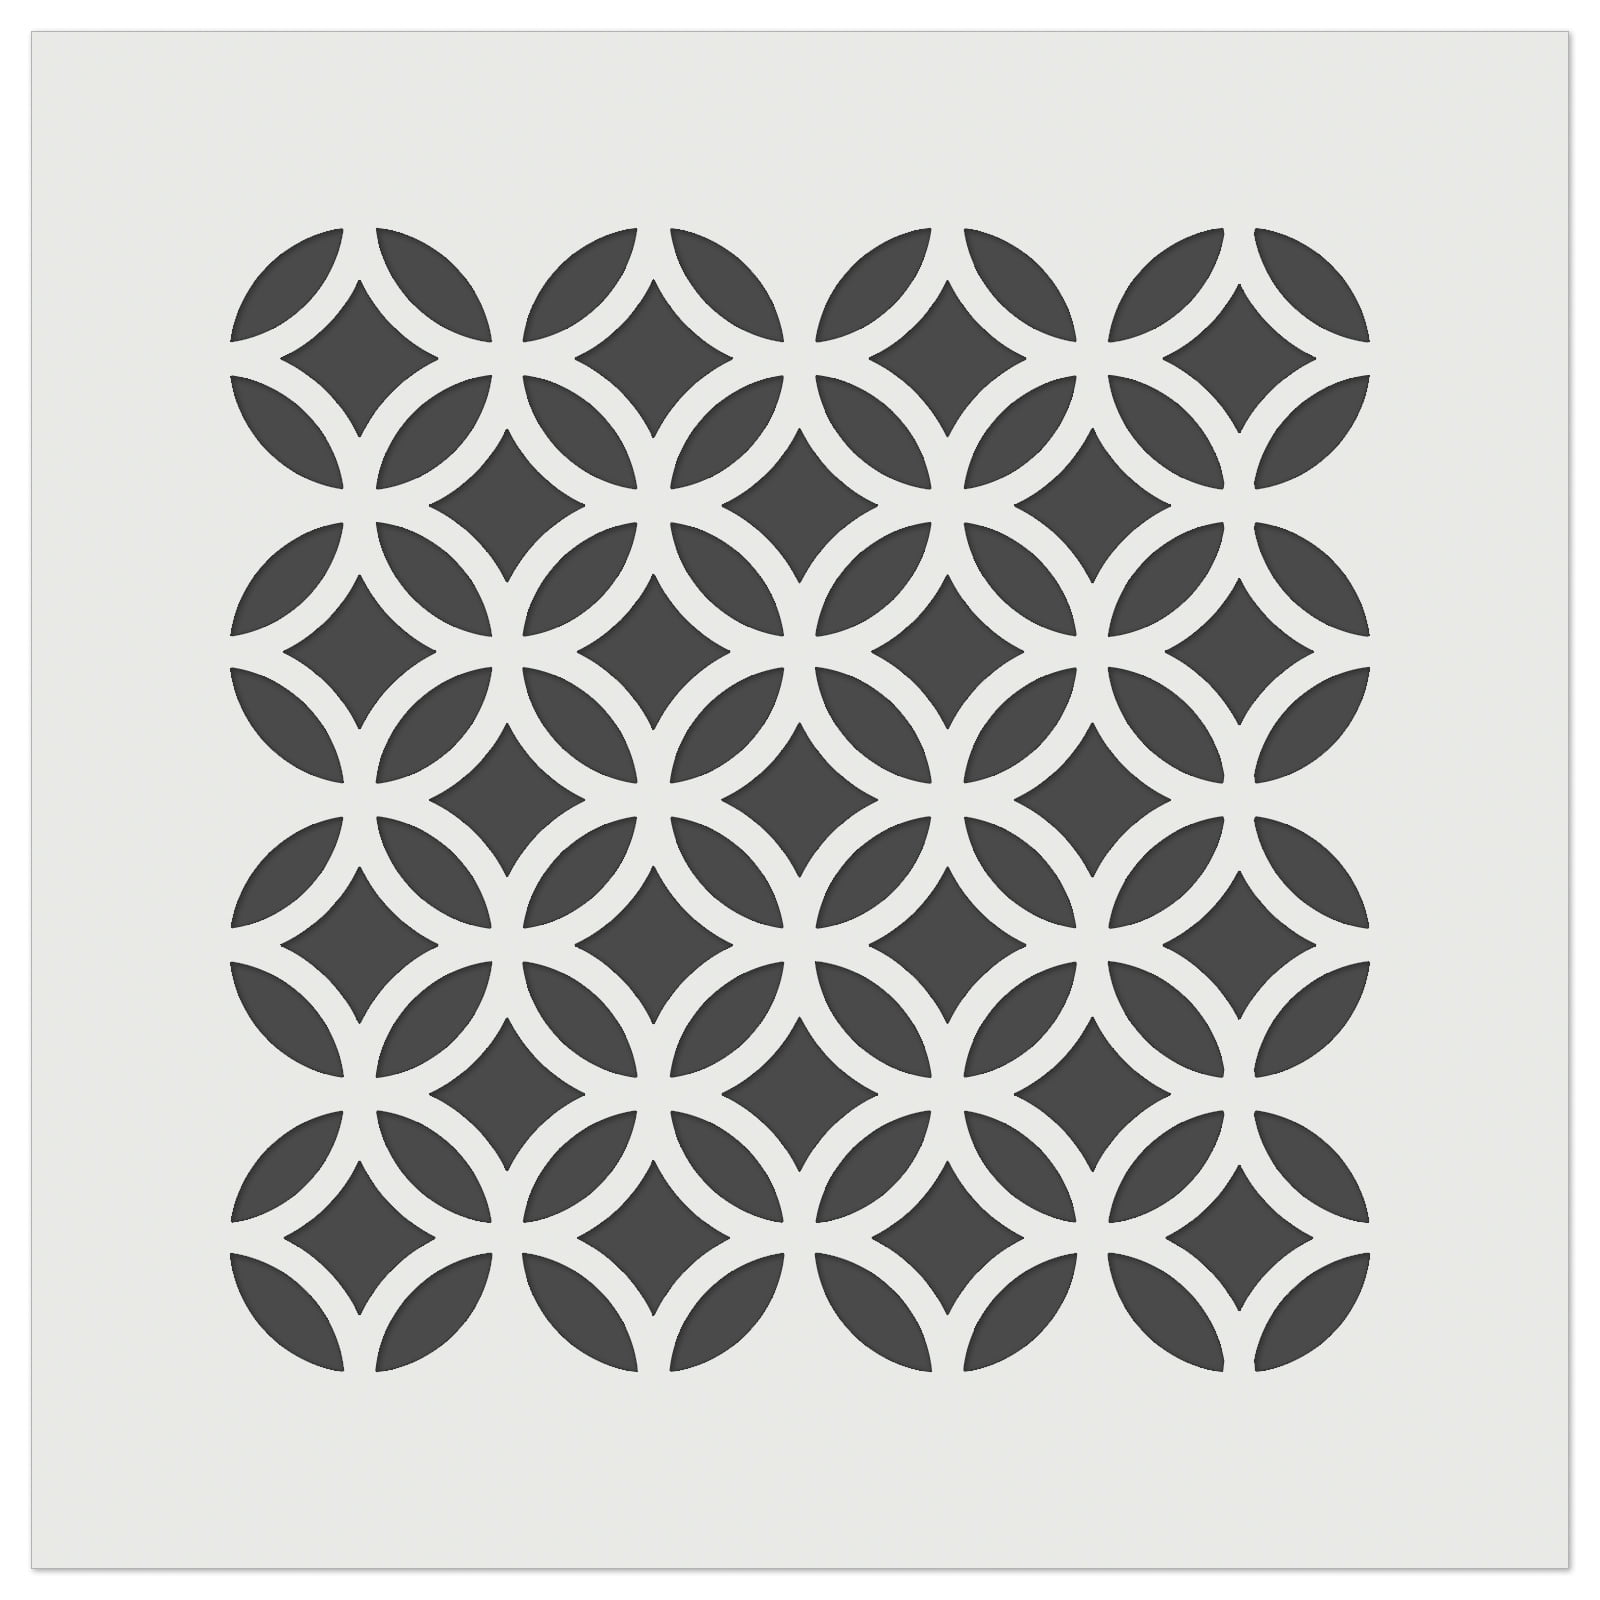 Geometric Overlapping Circles DIY Cookie Wall Craft Stencil - 7.0 Inch 